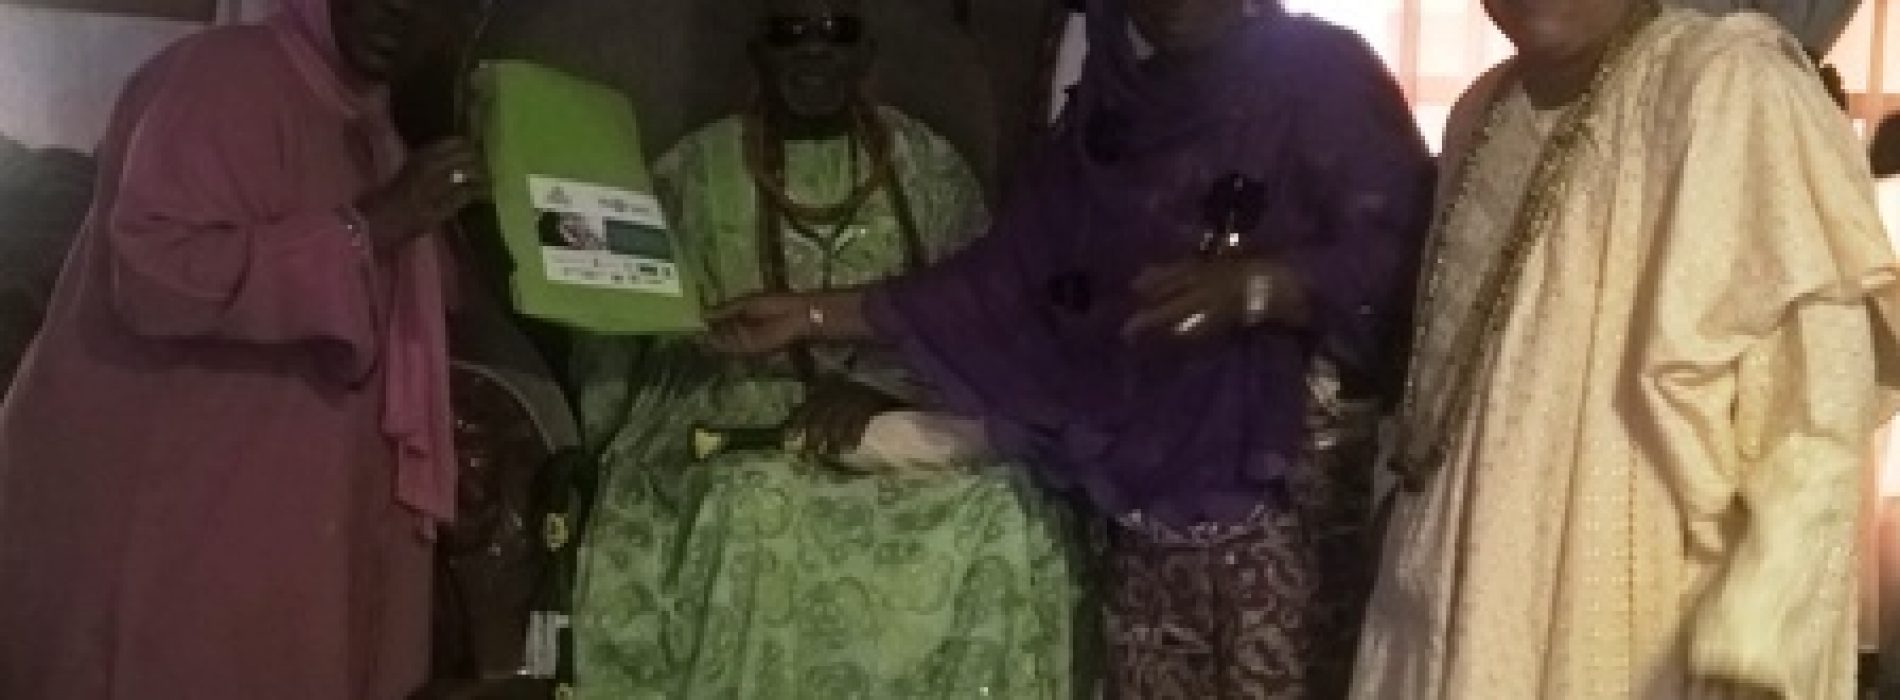 FOMWAN/PACFaH canvass traditional leaders’ support in fight against child killer diseases